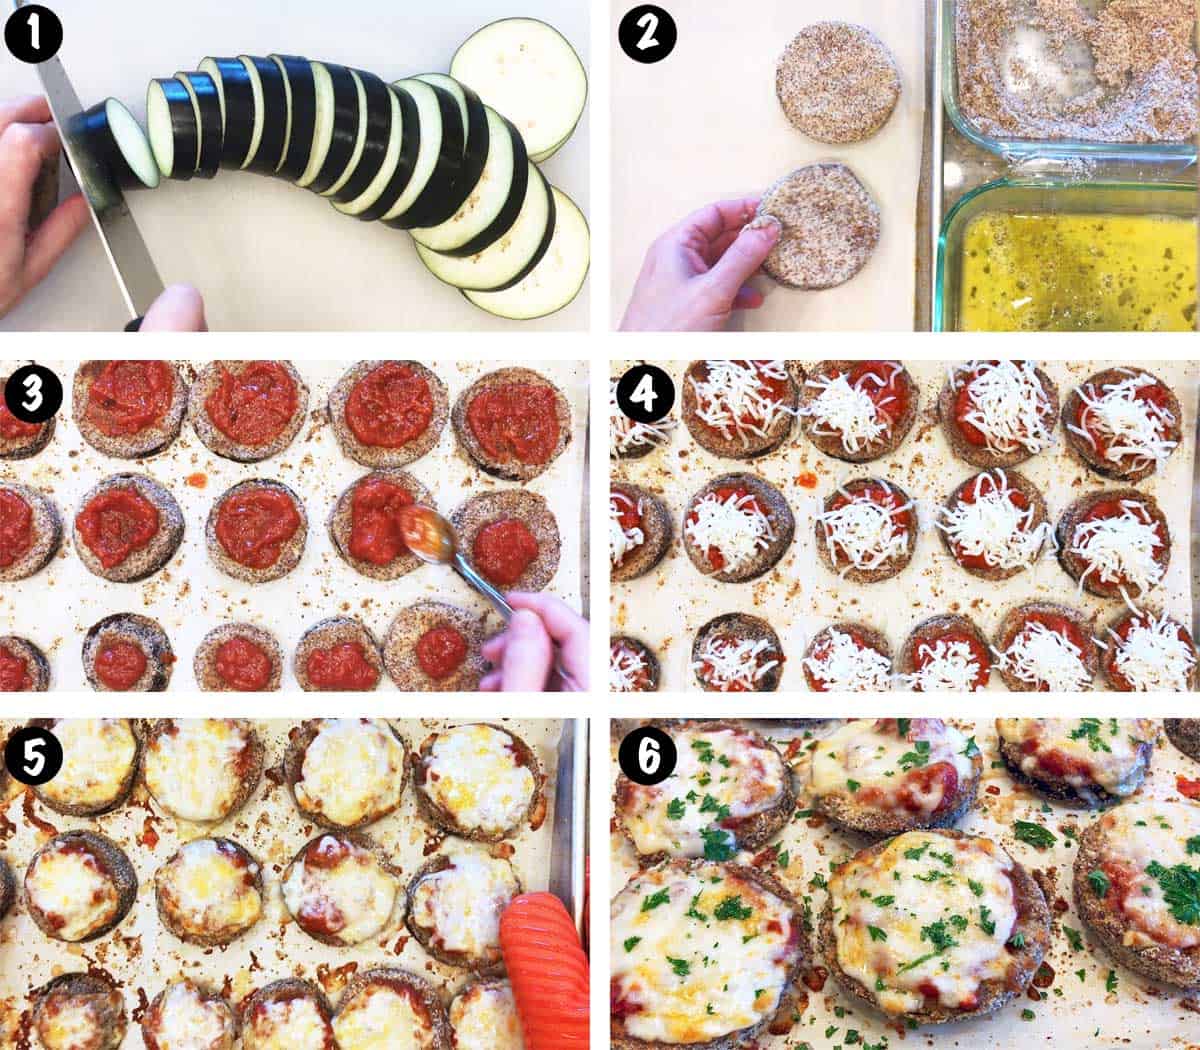 A six-photo collage showing the steps for making keto eggplant parmesan. 